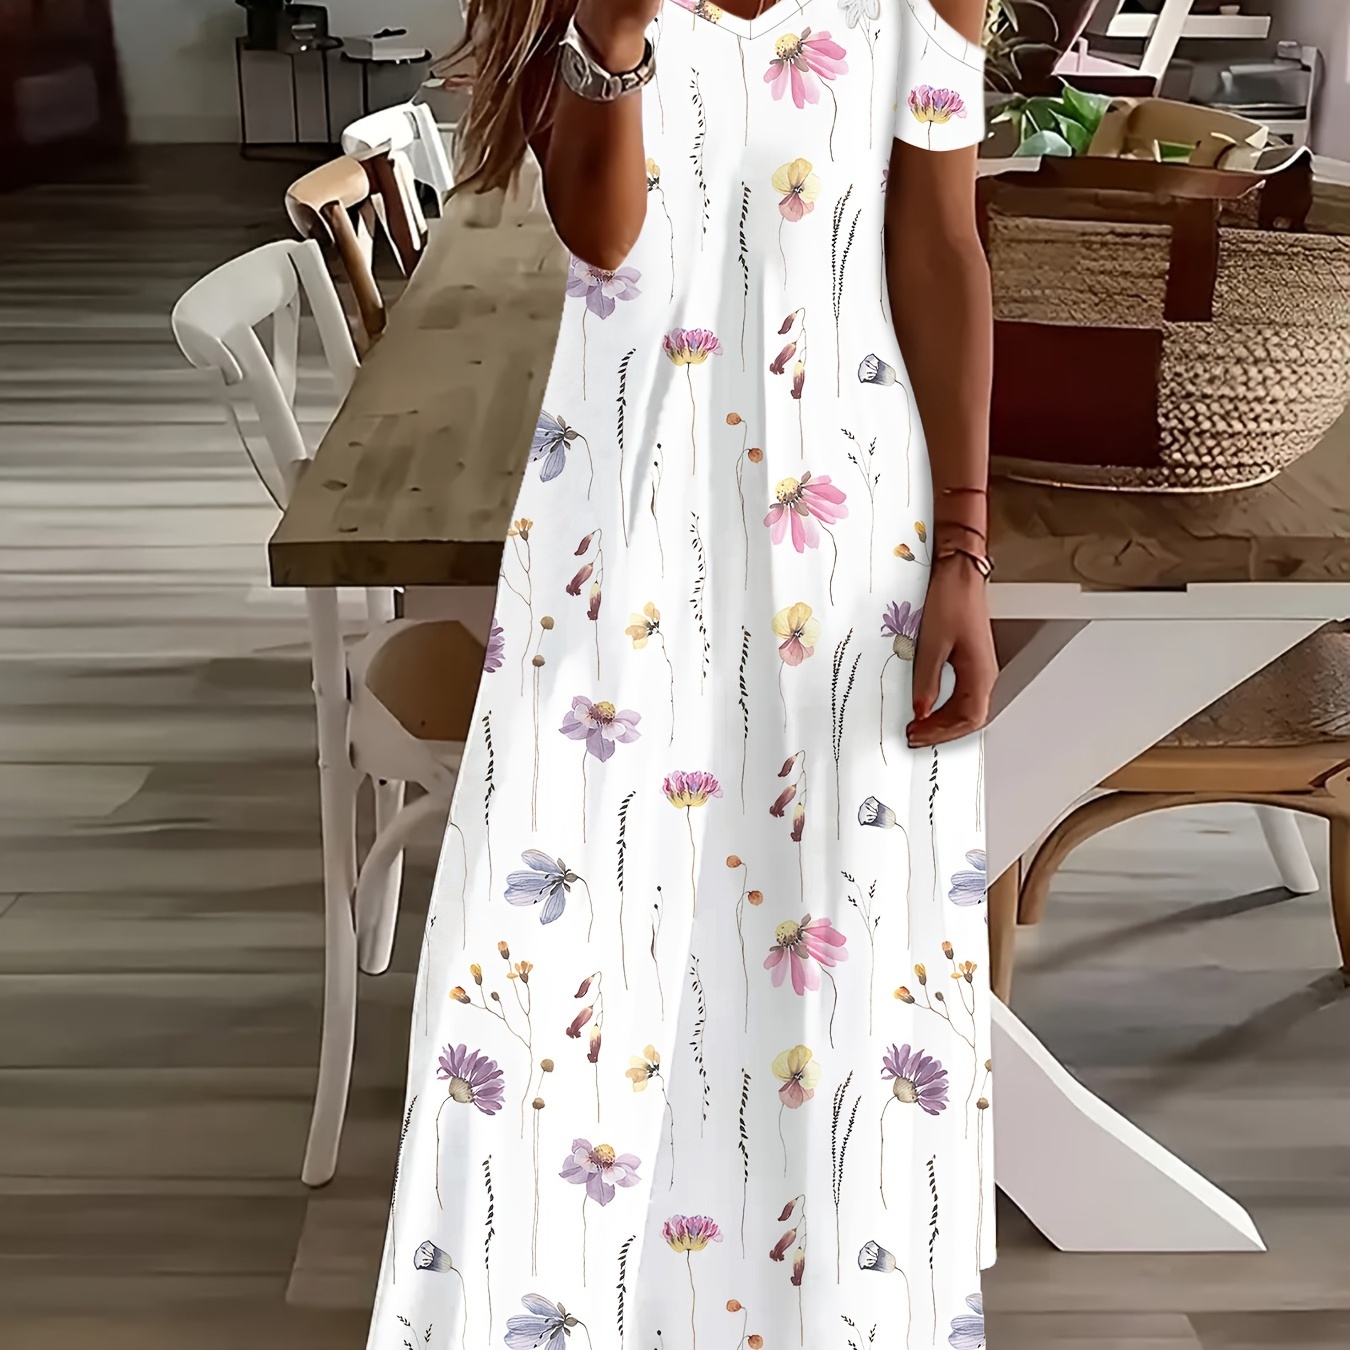 

Floral Print Lace Splicing Dress, Casual Cold Shoulder Ankle Length A-line Dress For Spring & Summer, Women's Clothing